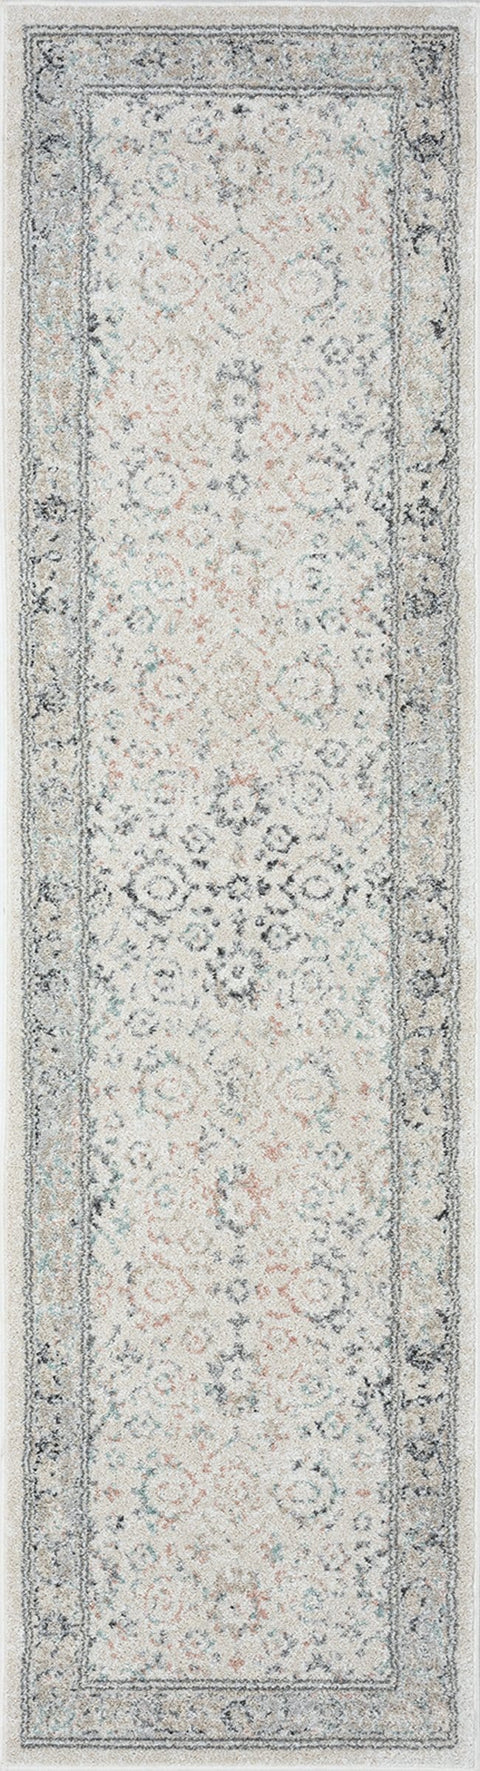 Anine Cream And Grey Multi-Color Traditional Floral Runner Rug